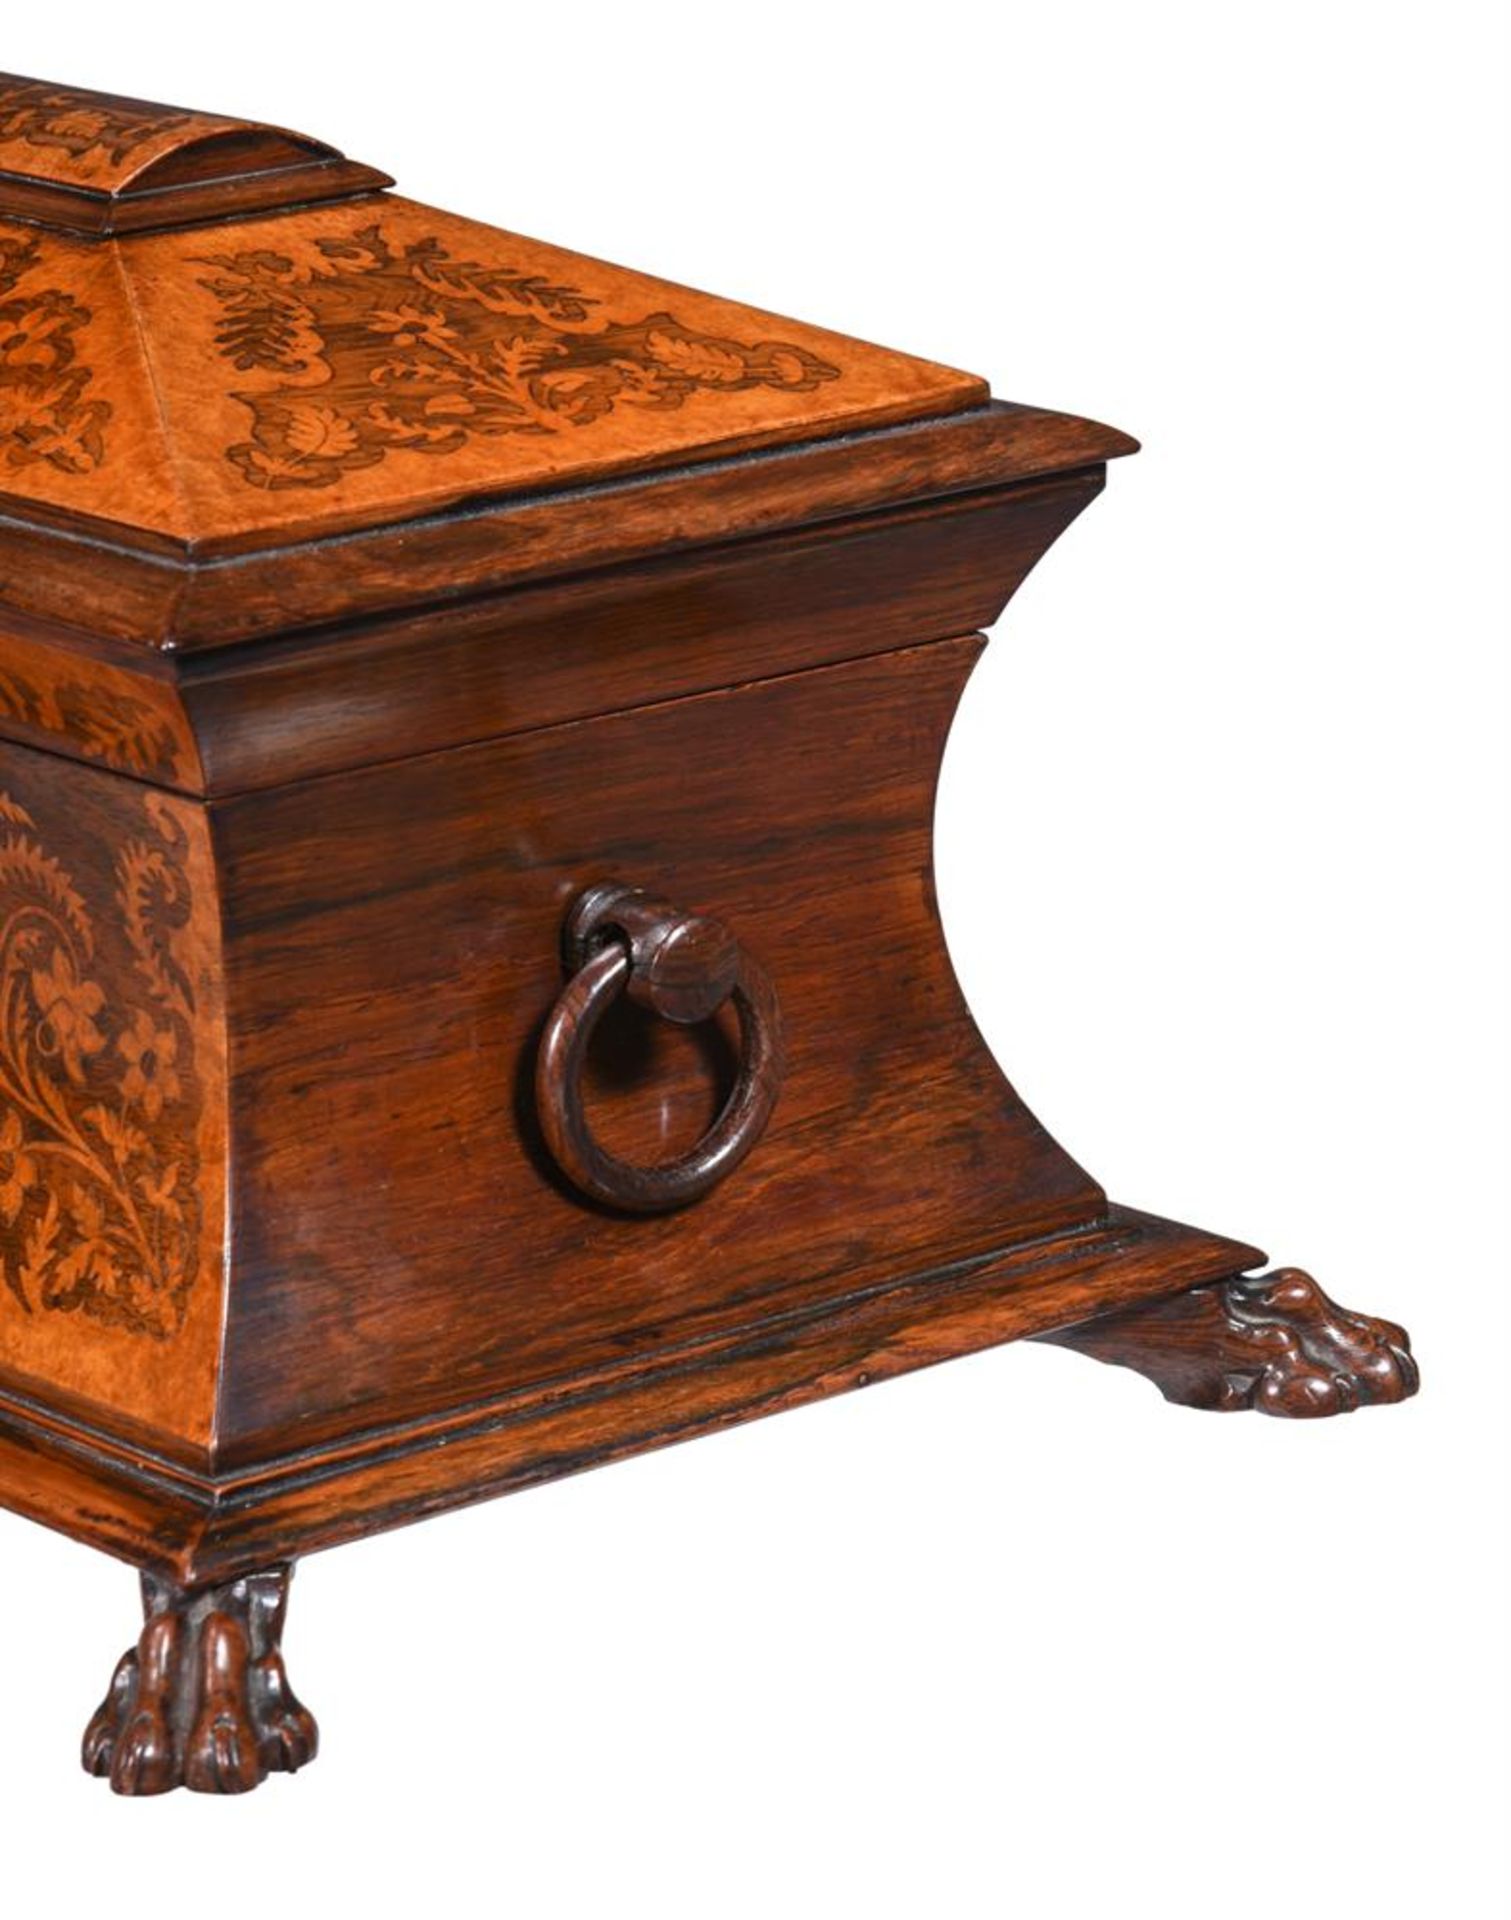 Y A GEORGE IV ROSEWOOD AND AMBOYNA MARQUETRY INLAID TEA CADDY - Image 3 of 4